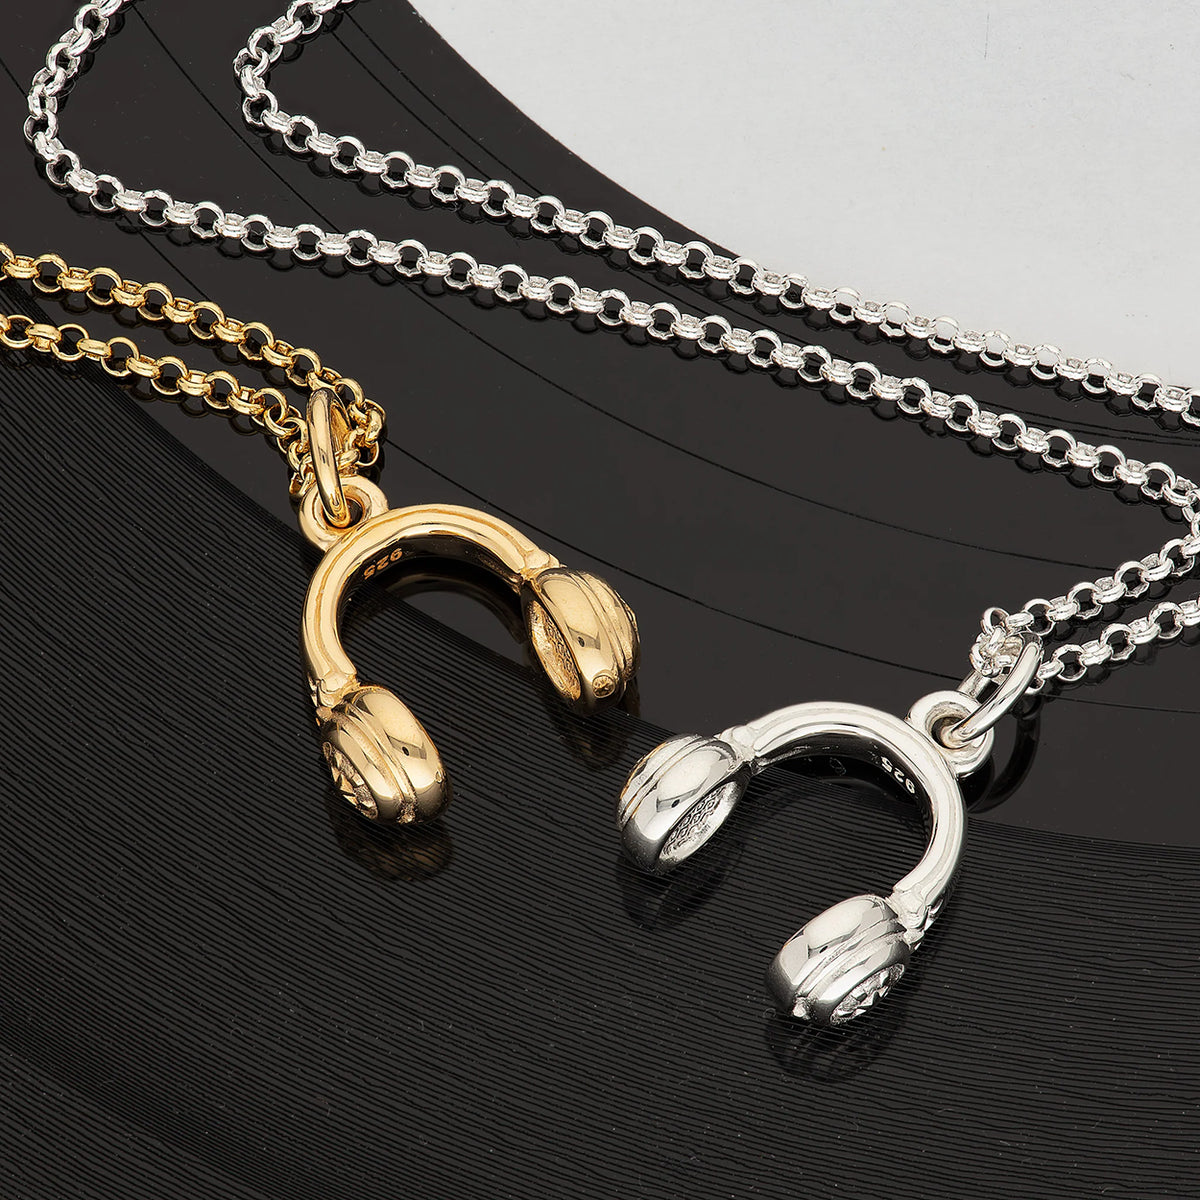 Gold and Silver headphones necklace lifestyle shot.